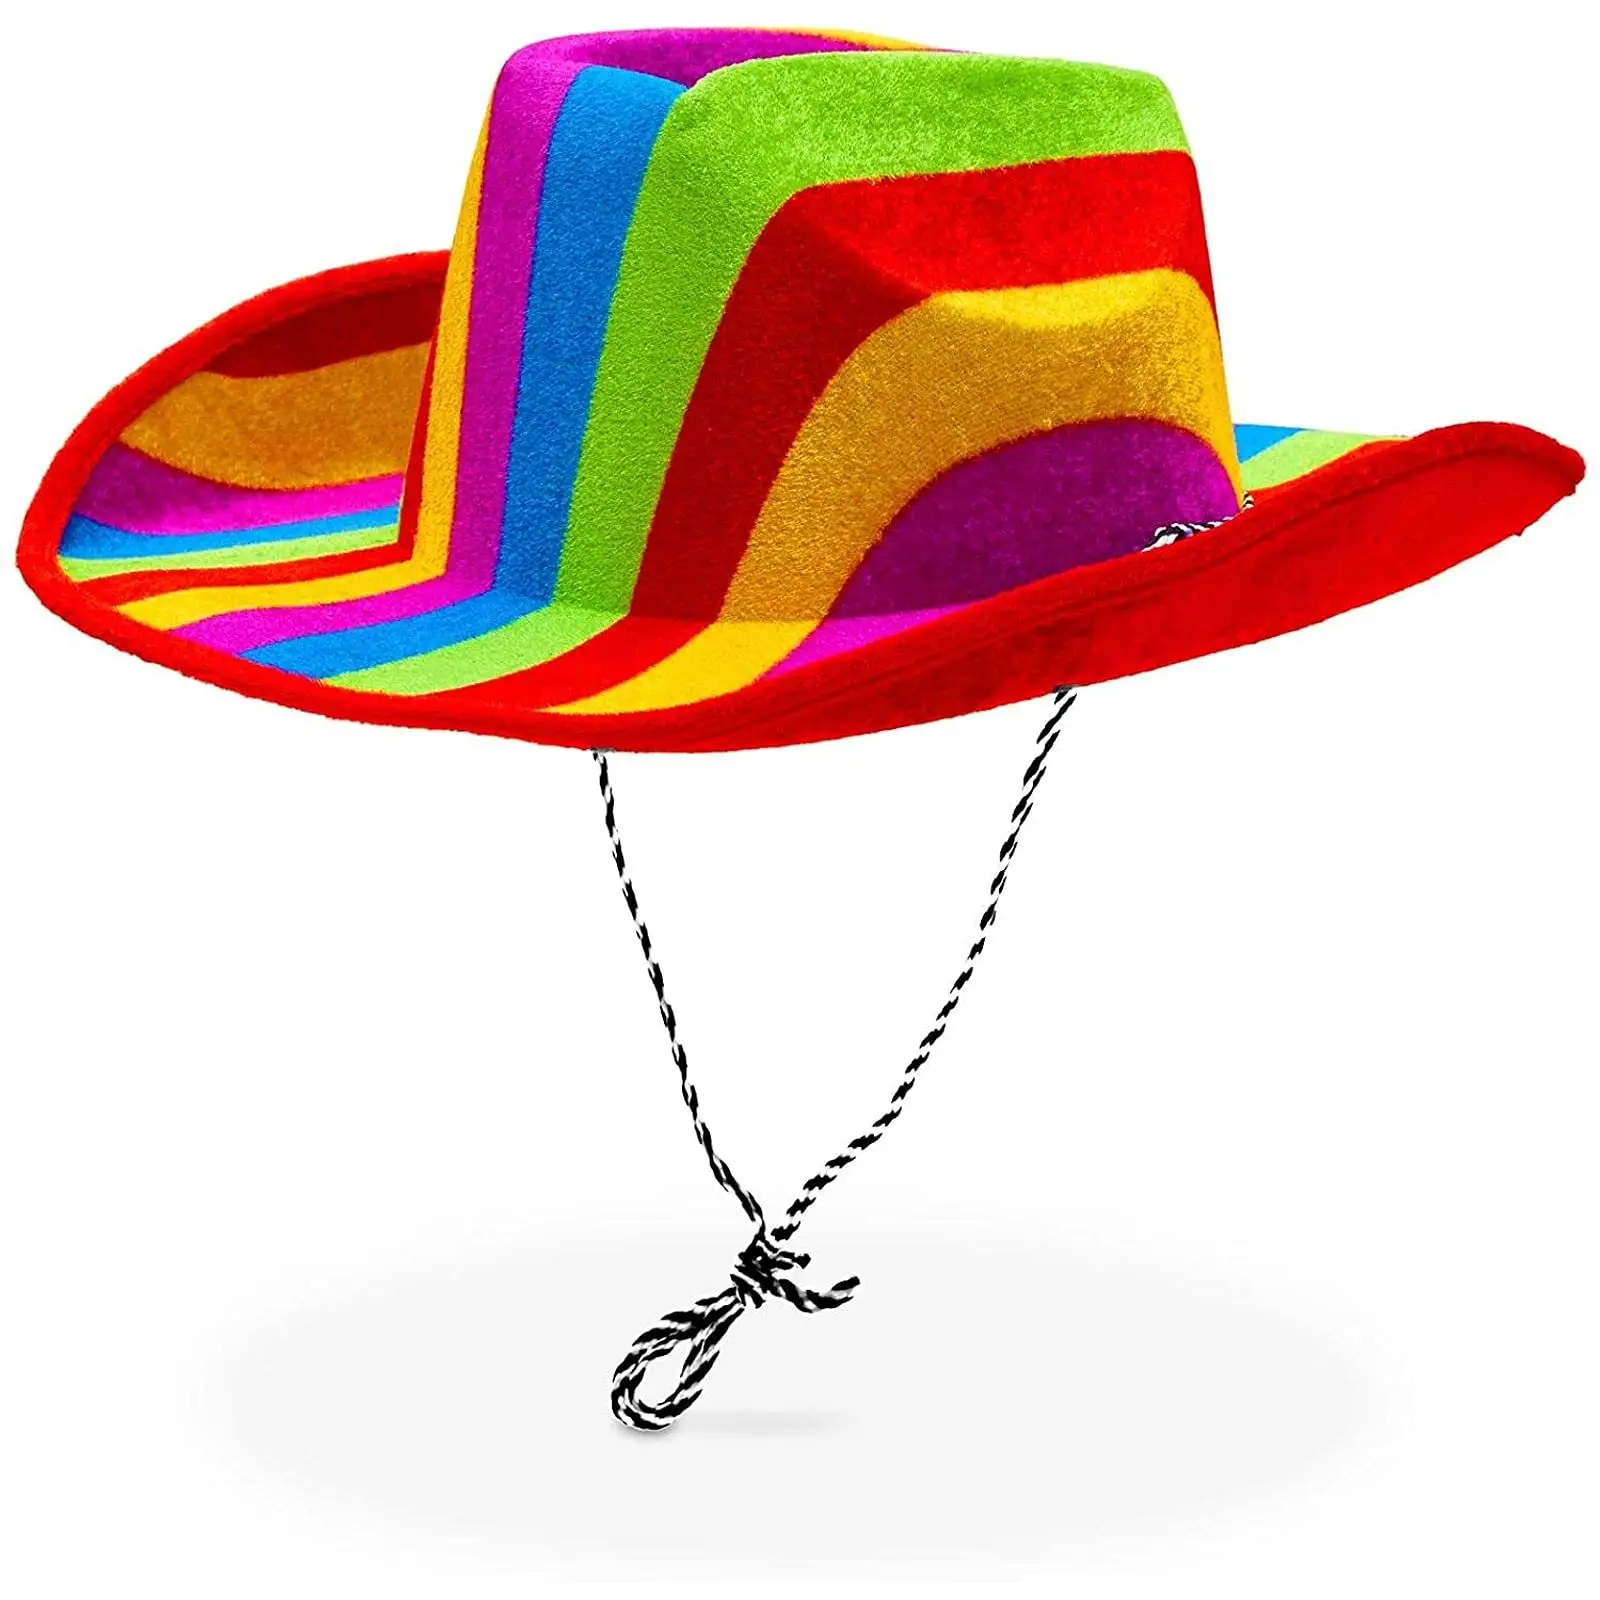 Celebrate Pride day Rainbow Cowboy Hat for Pride Parade, Costume Party (Adults One Size) for Men Women Costume